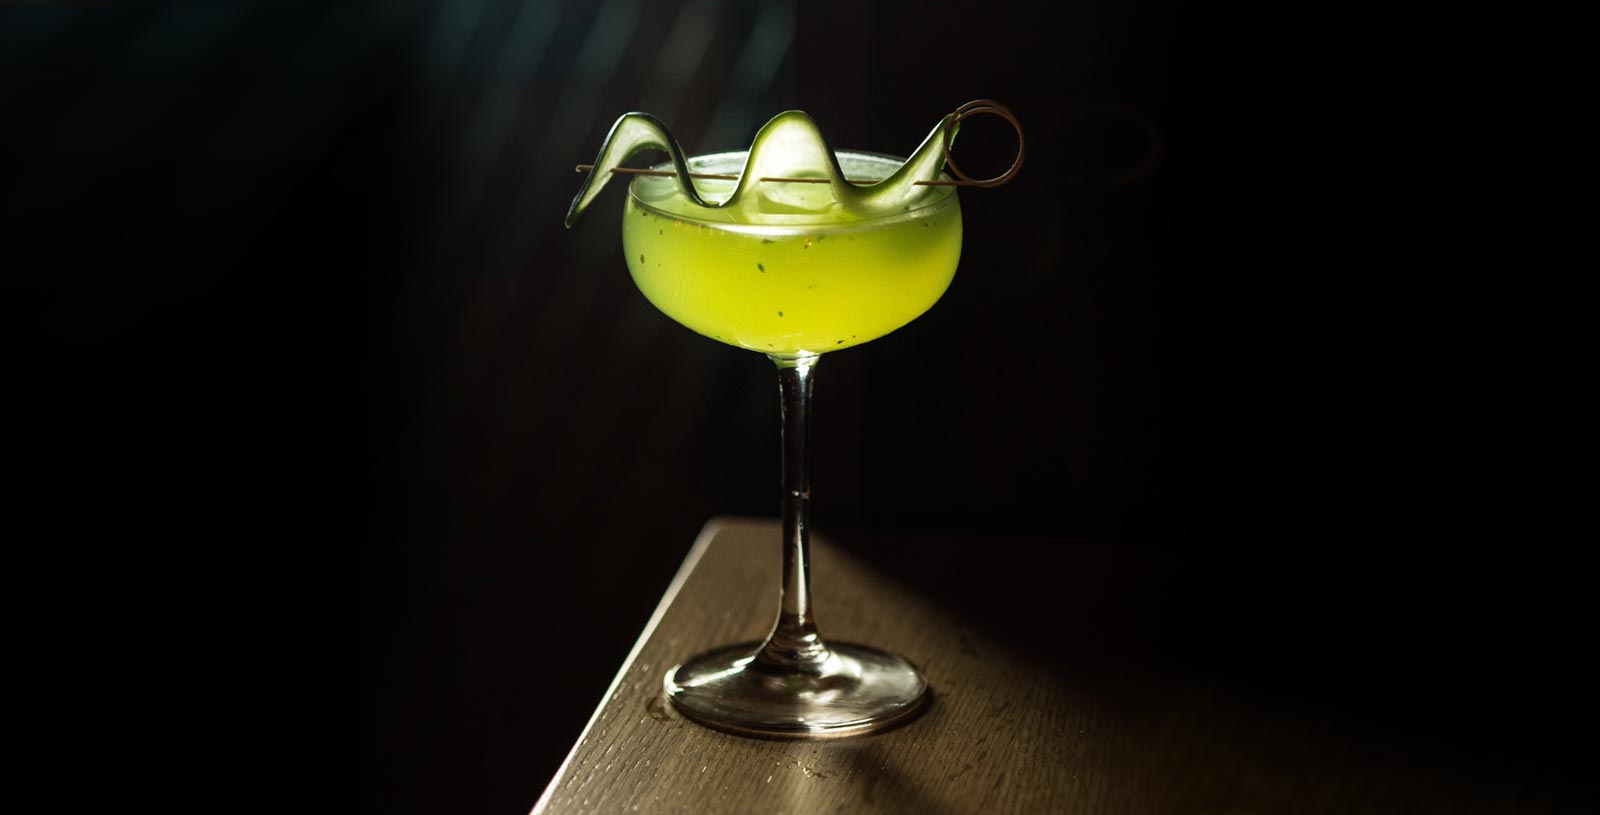 Cocktail called Green Goddess with cucumber garnished